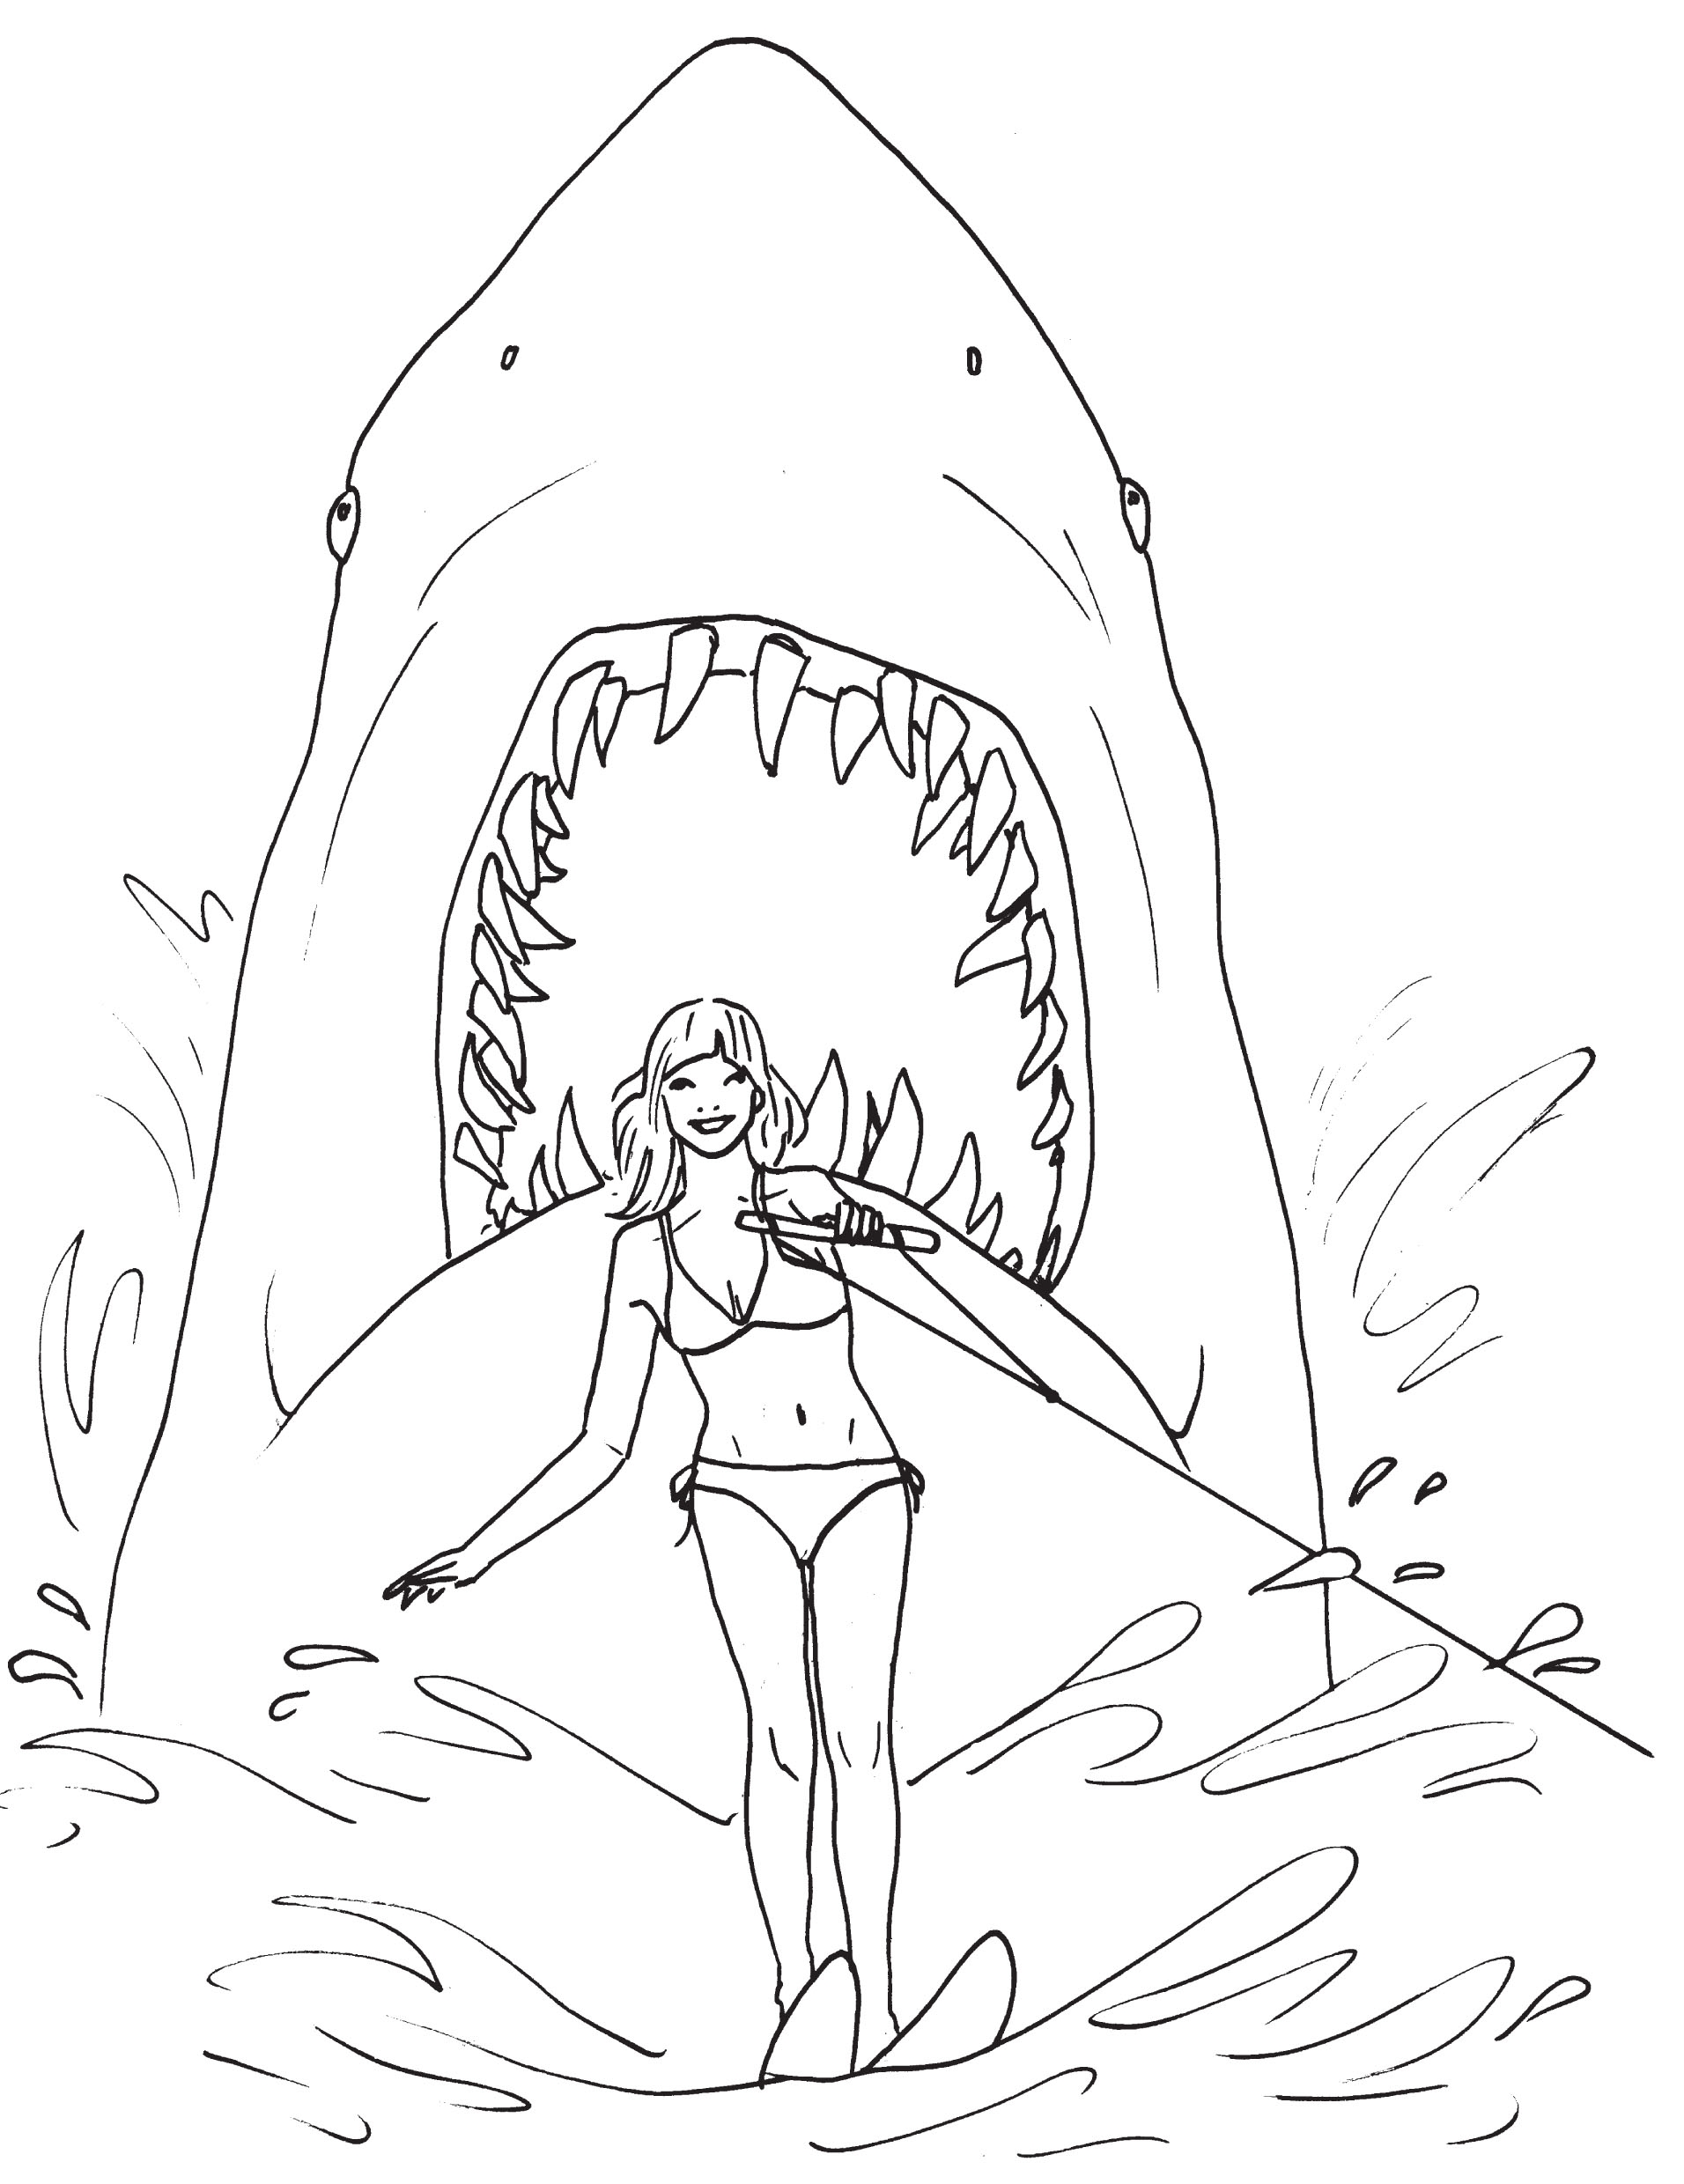 Scary Shark Coloring Pages at GetColorings.com | Free ...